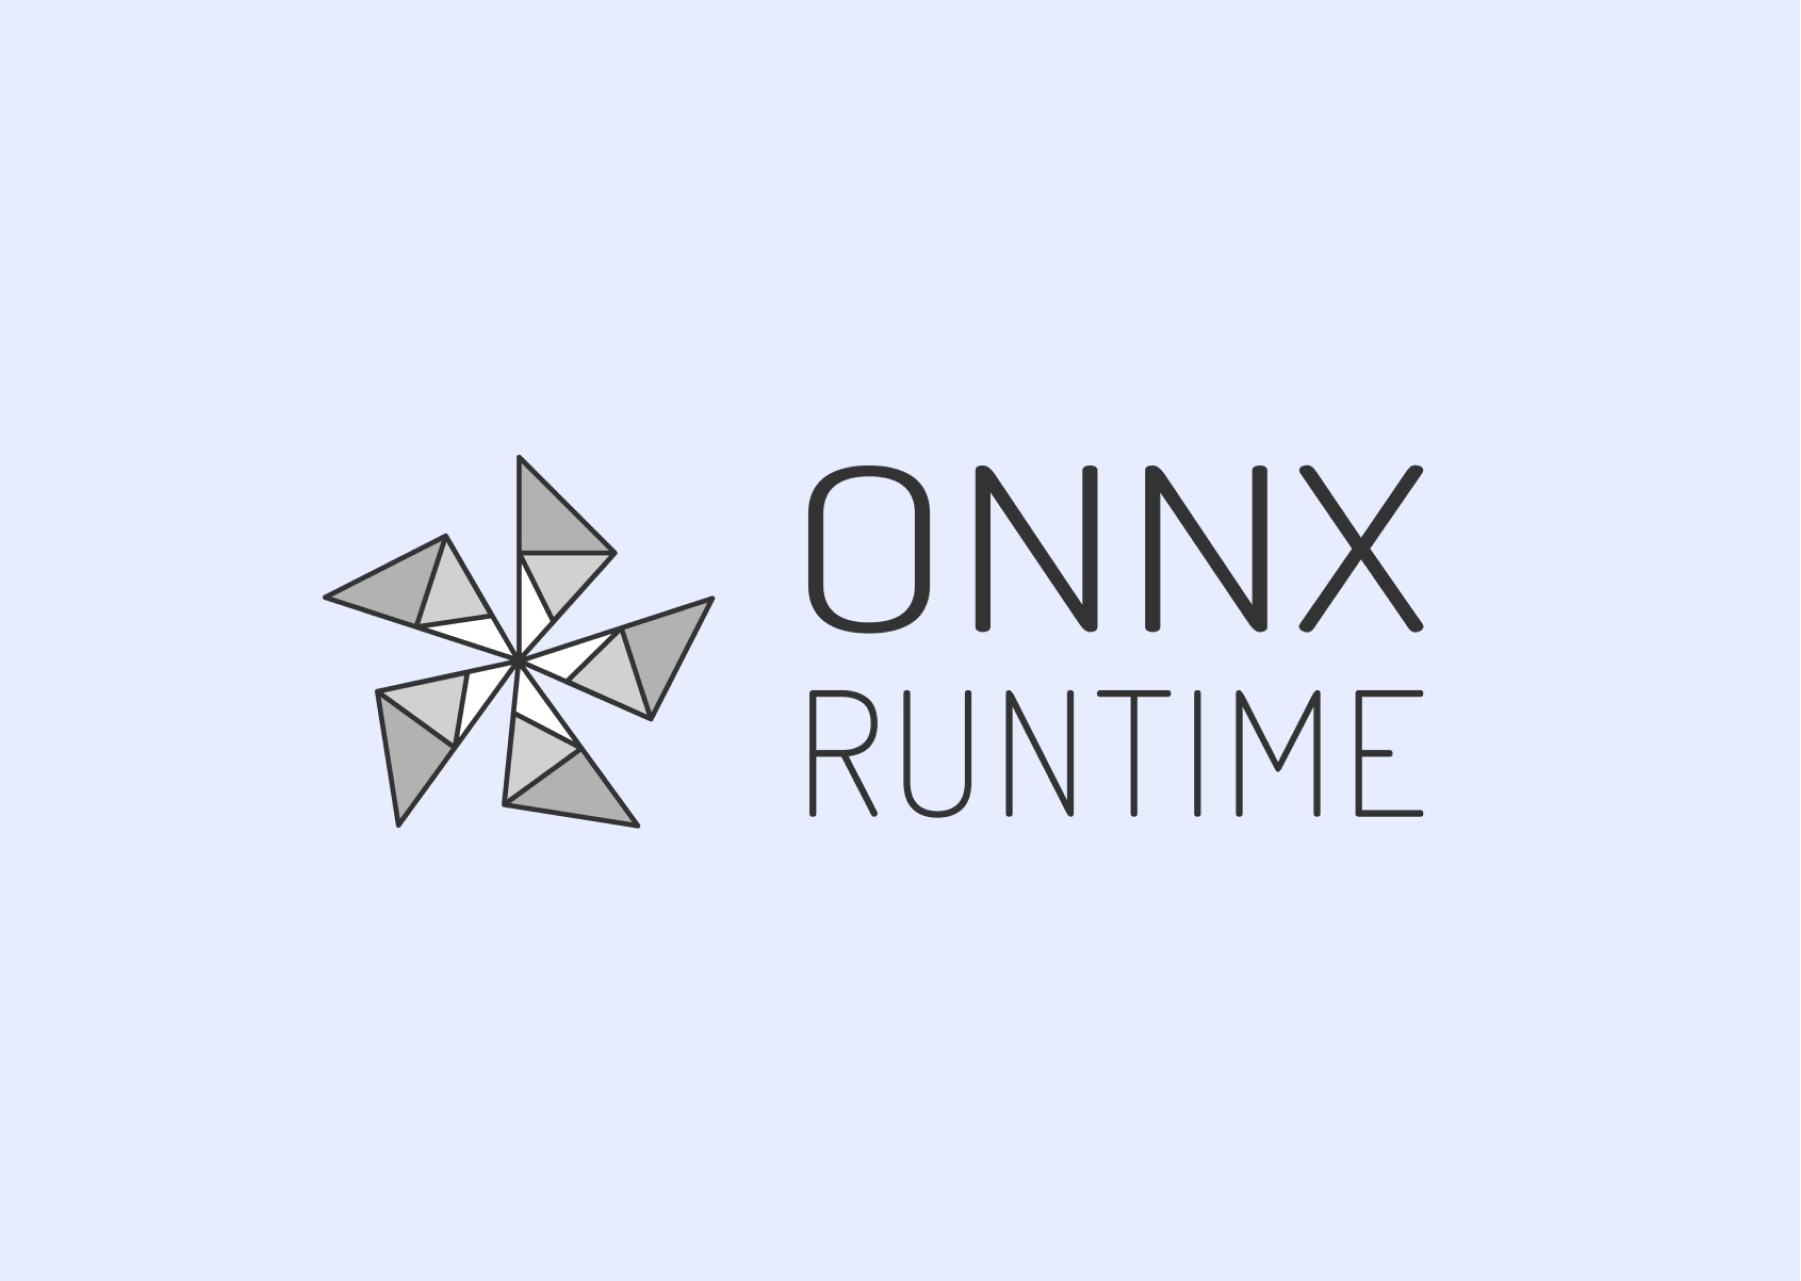 ONNX Runtime : High-performance deep learning inference.